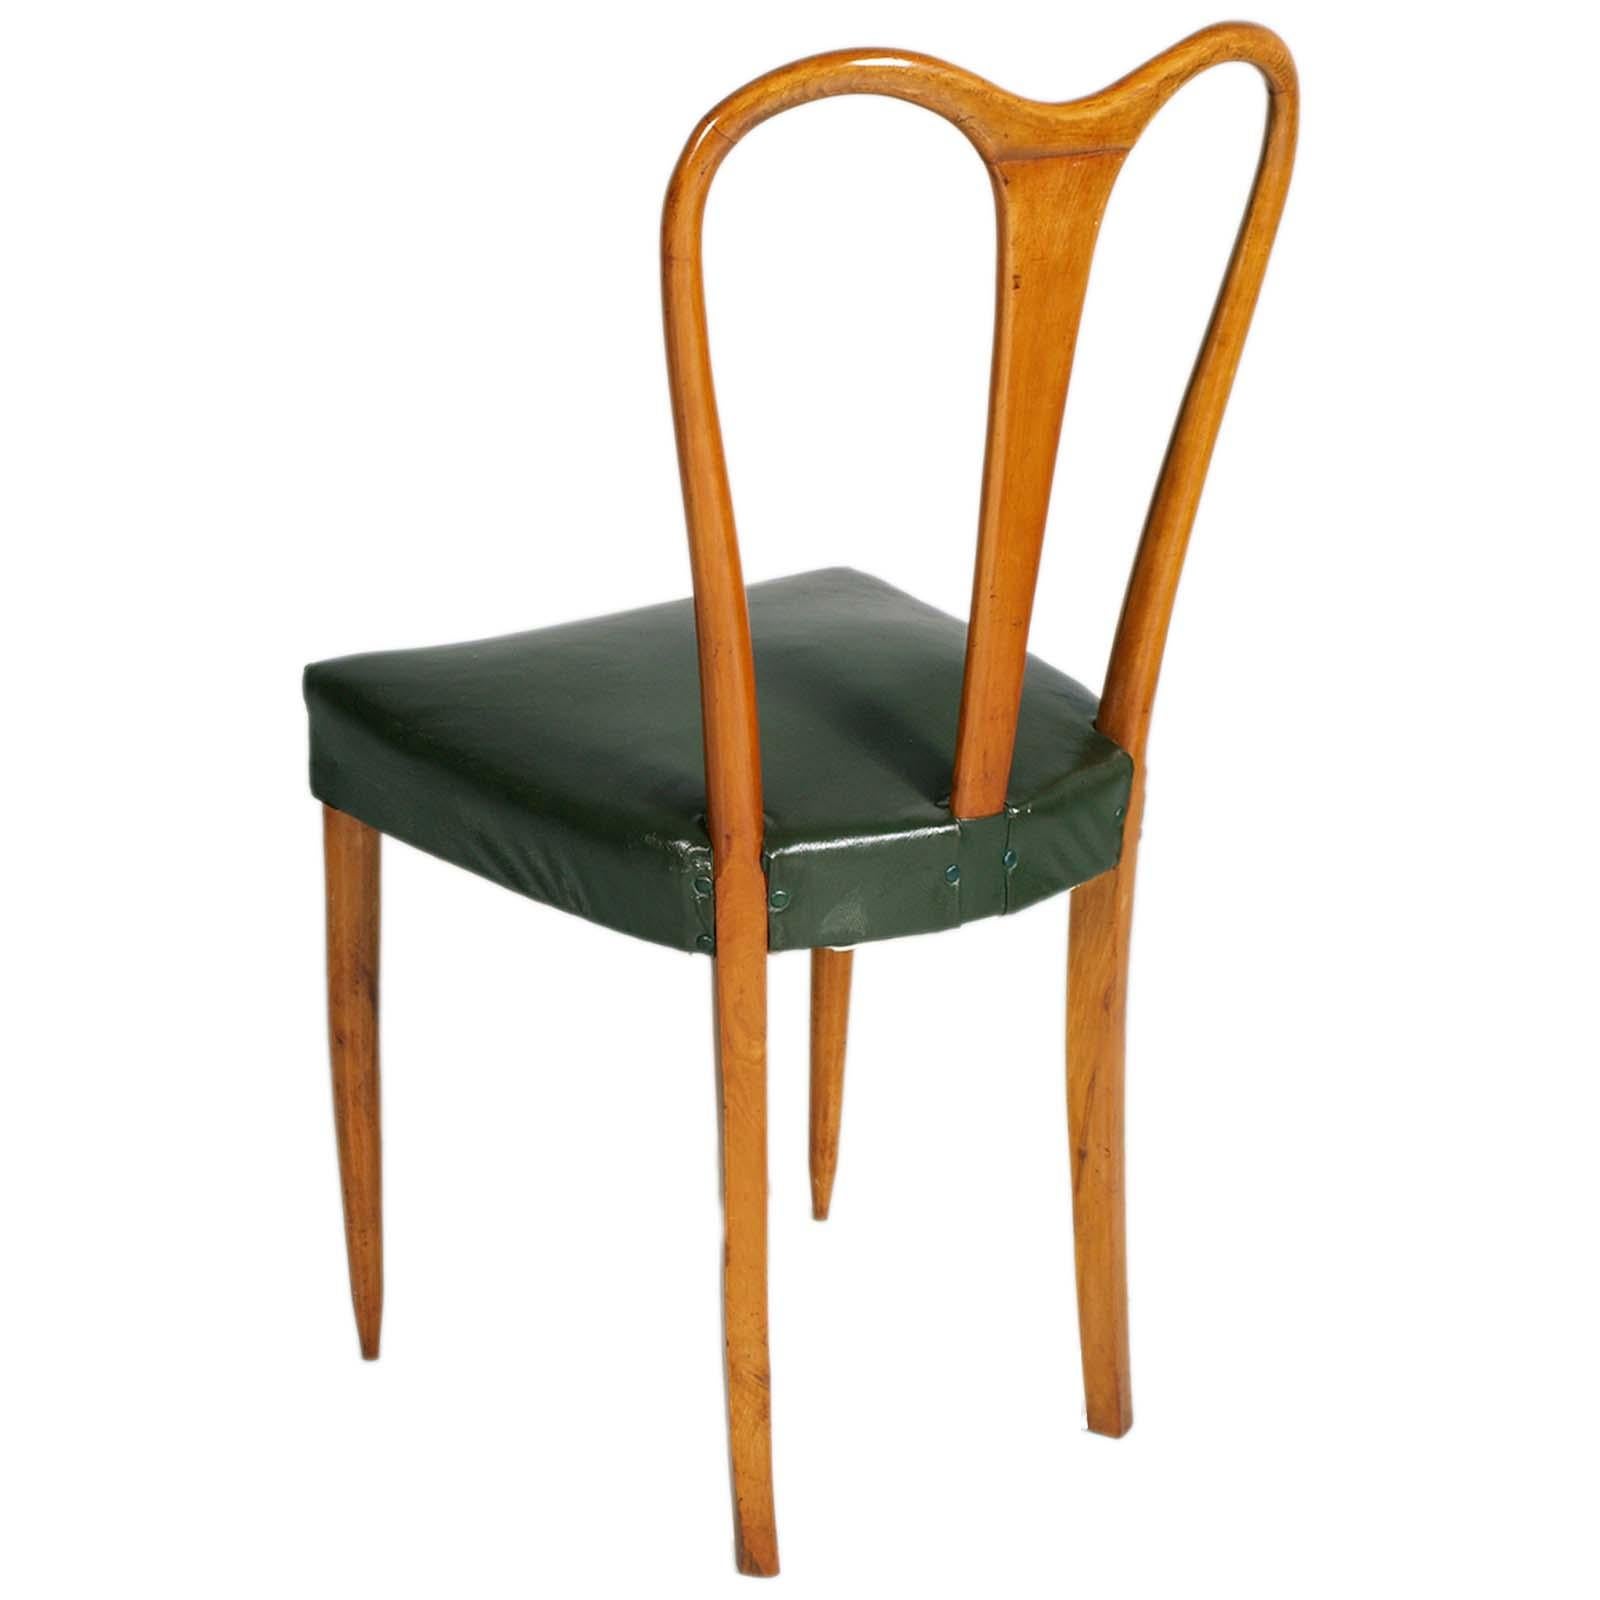 Italian Mid-Century Chairs by Ico Parisi for Fratelli Rizzi, Springs Seat & Leatherette